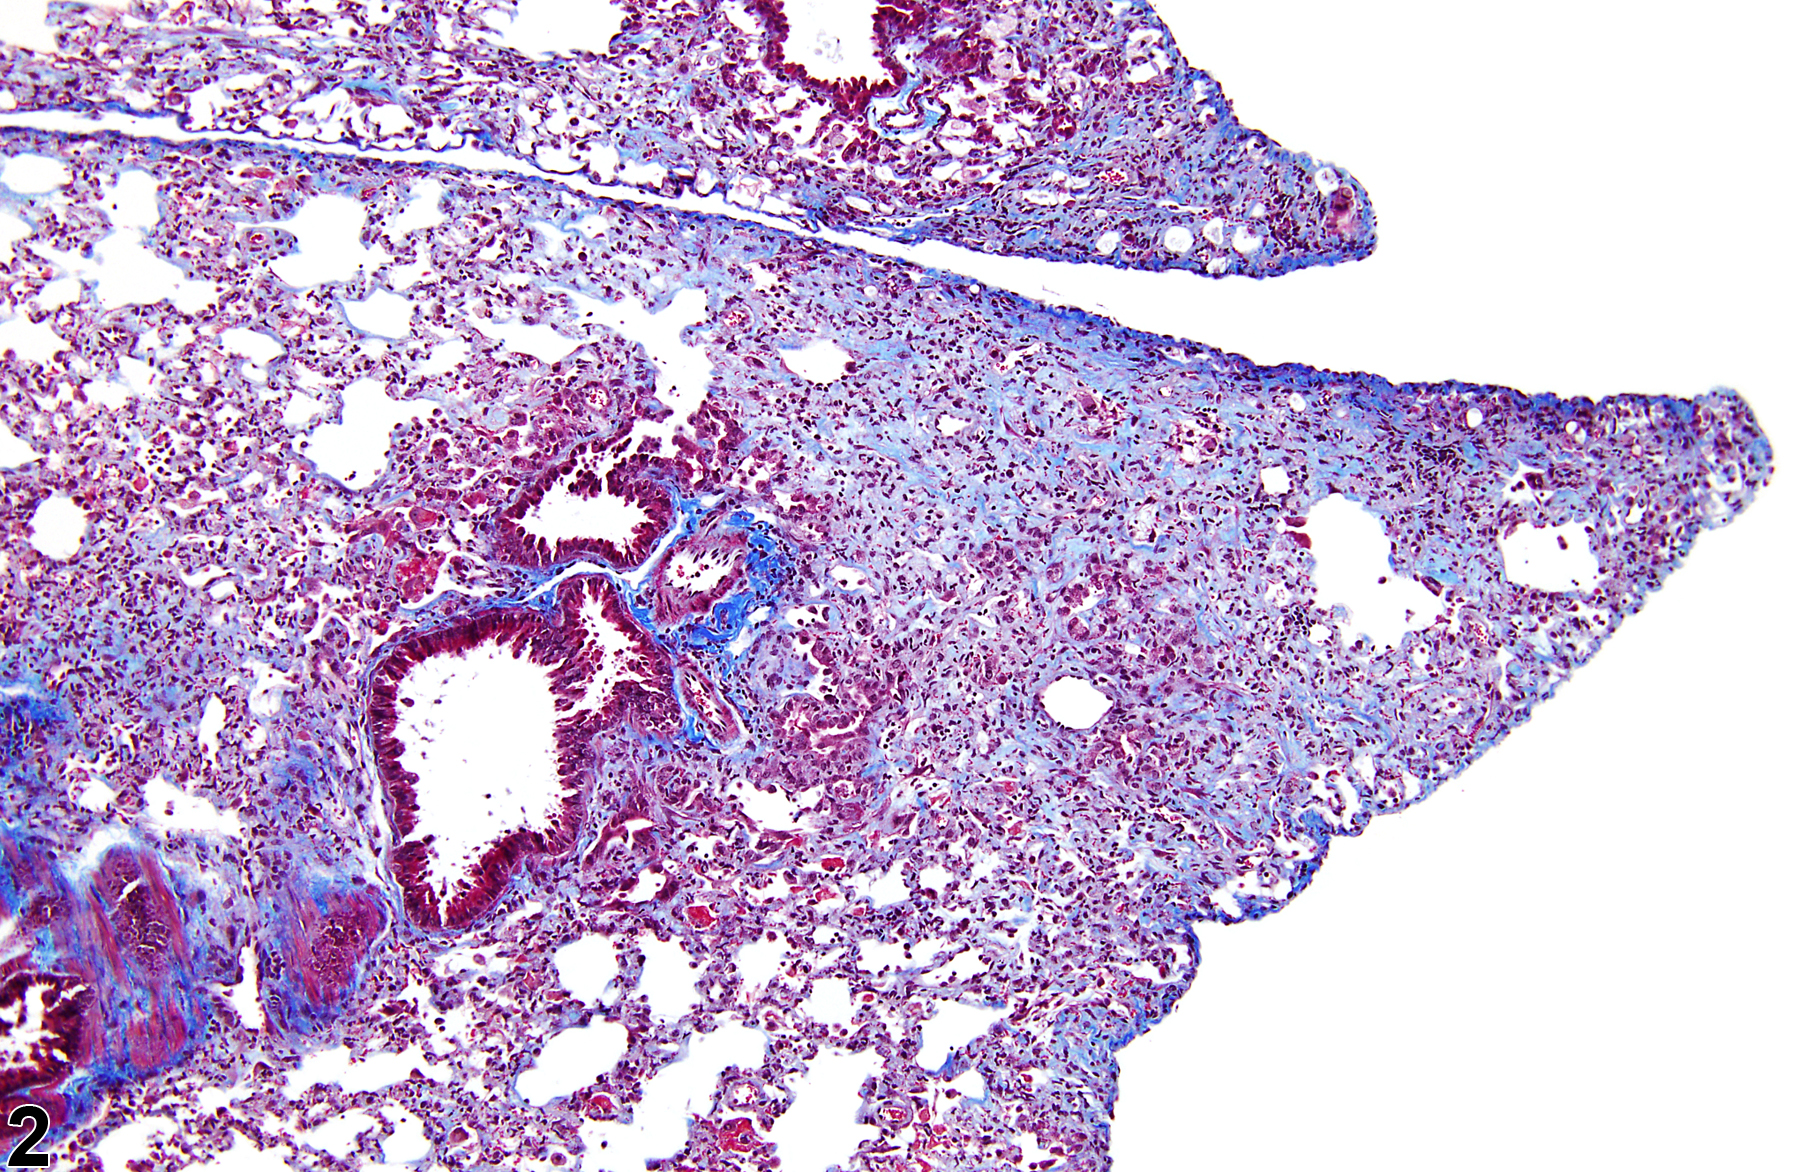 Image of fibrosis in the lung from a mouse